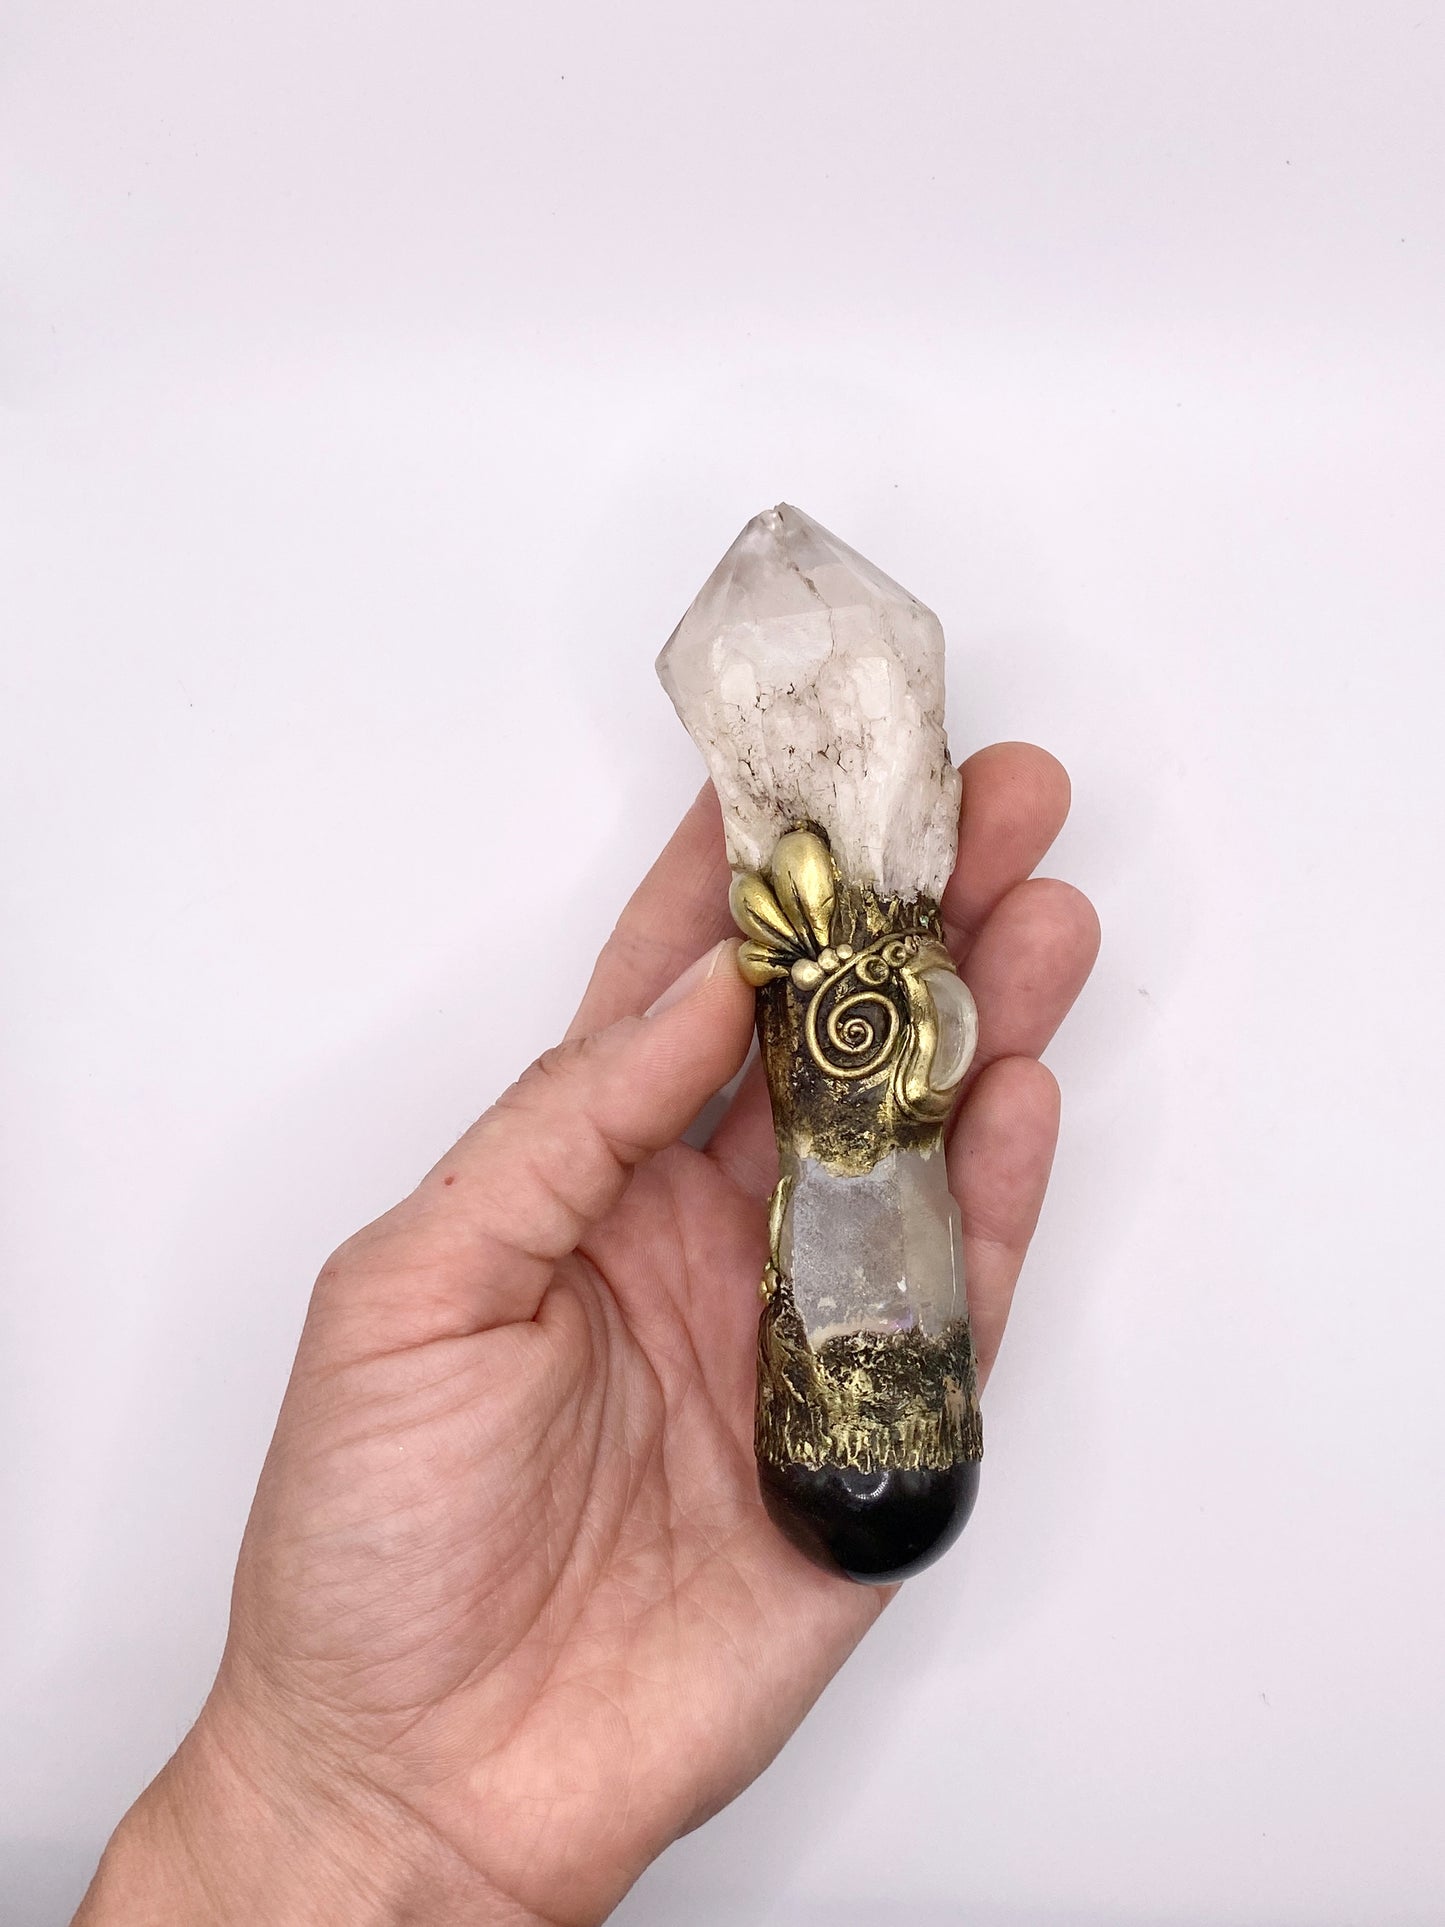 Crystal Energy Wand with Candle Quartz, Angel Aura Quartz, Gold Sheen Obsidian and Moonstone Crescent - Reversible Metaphysical Wand